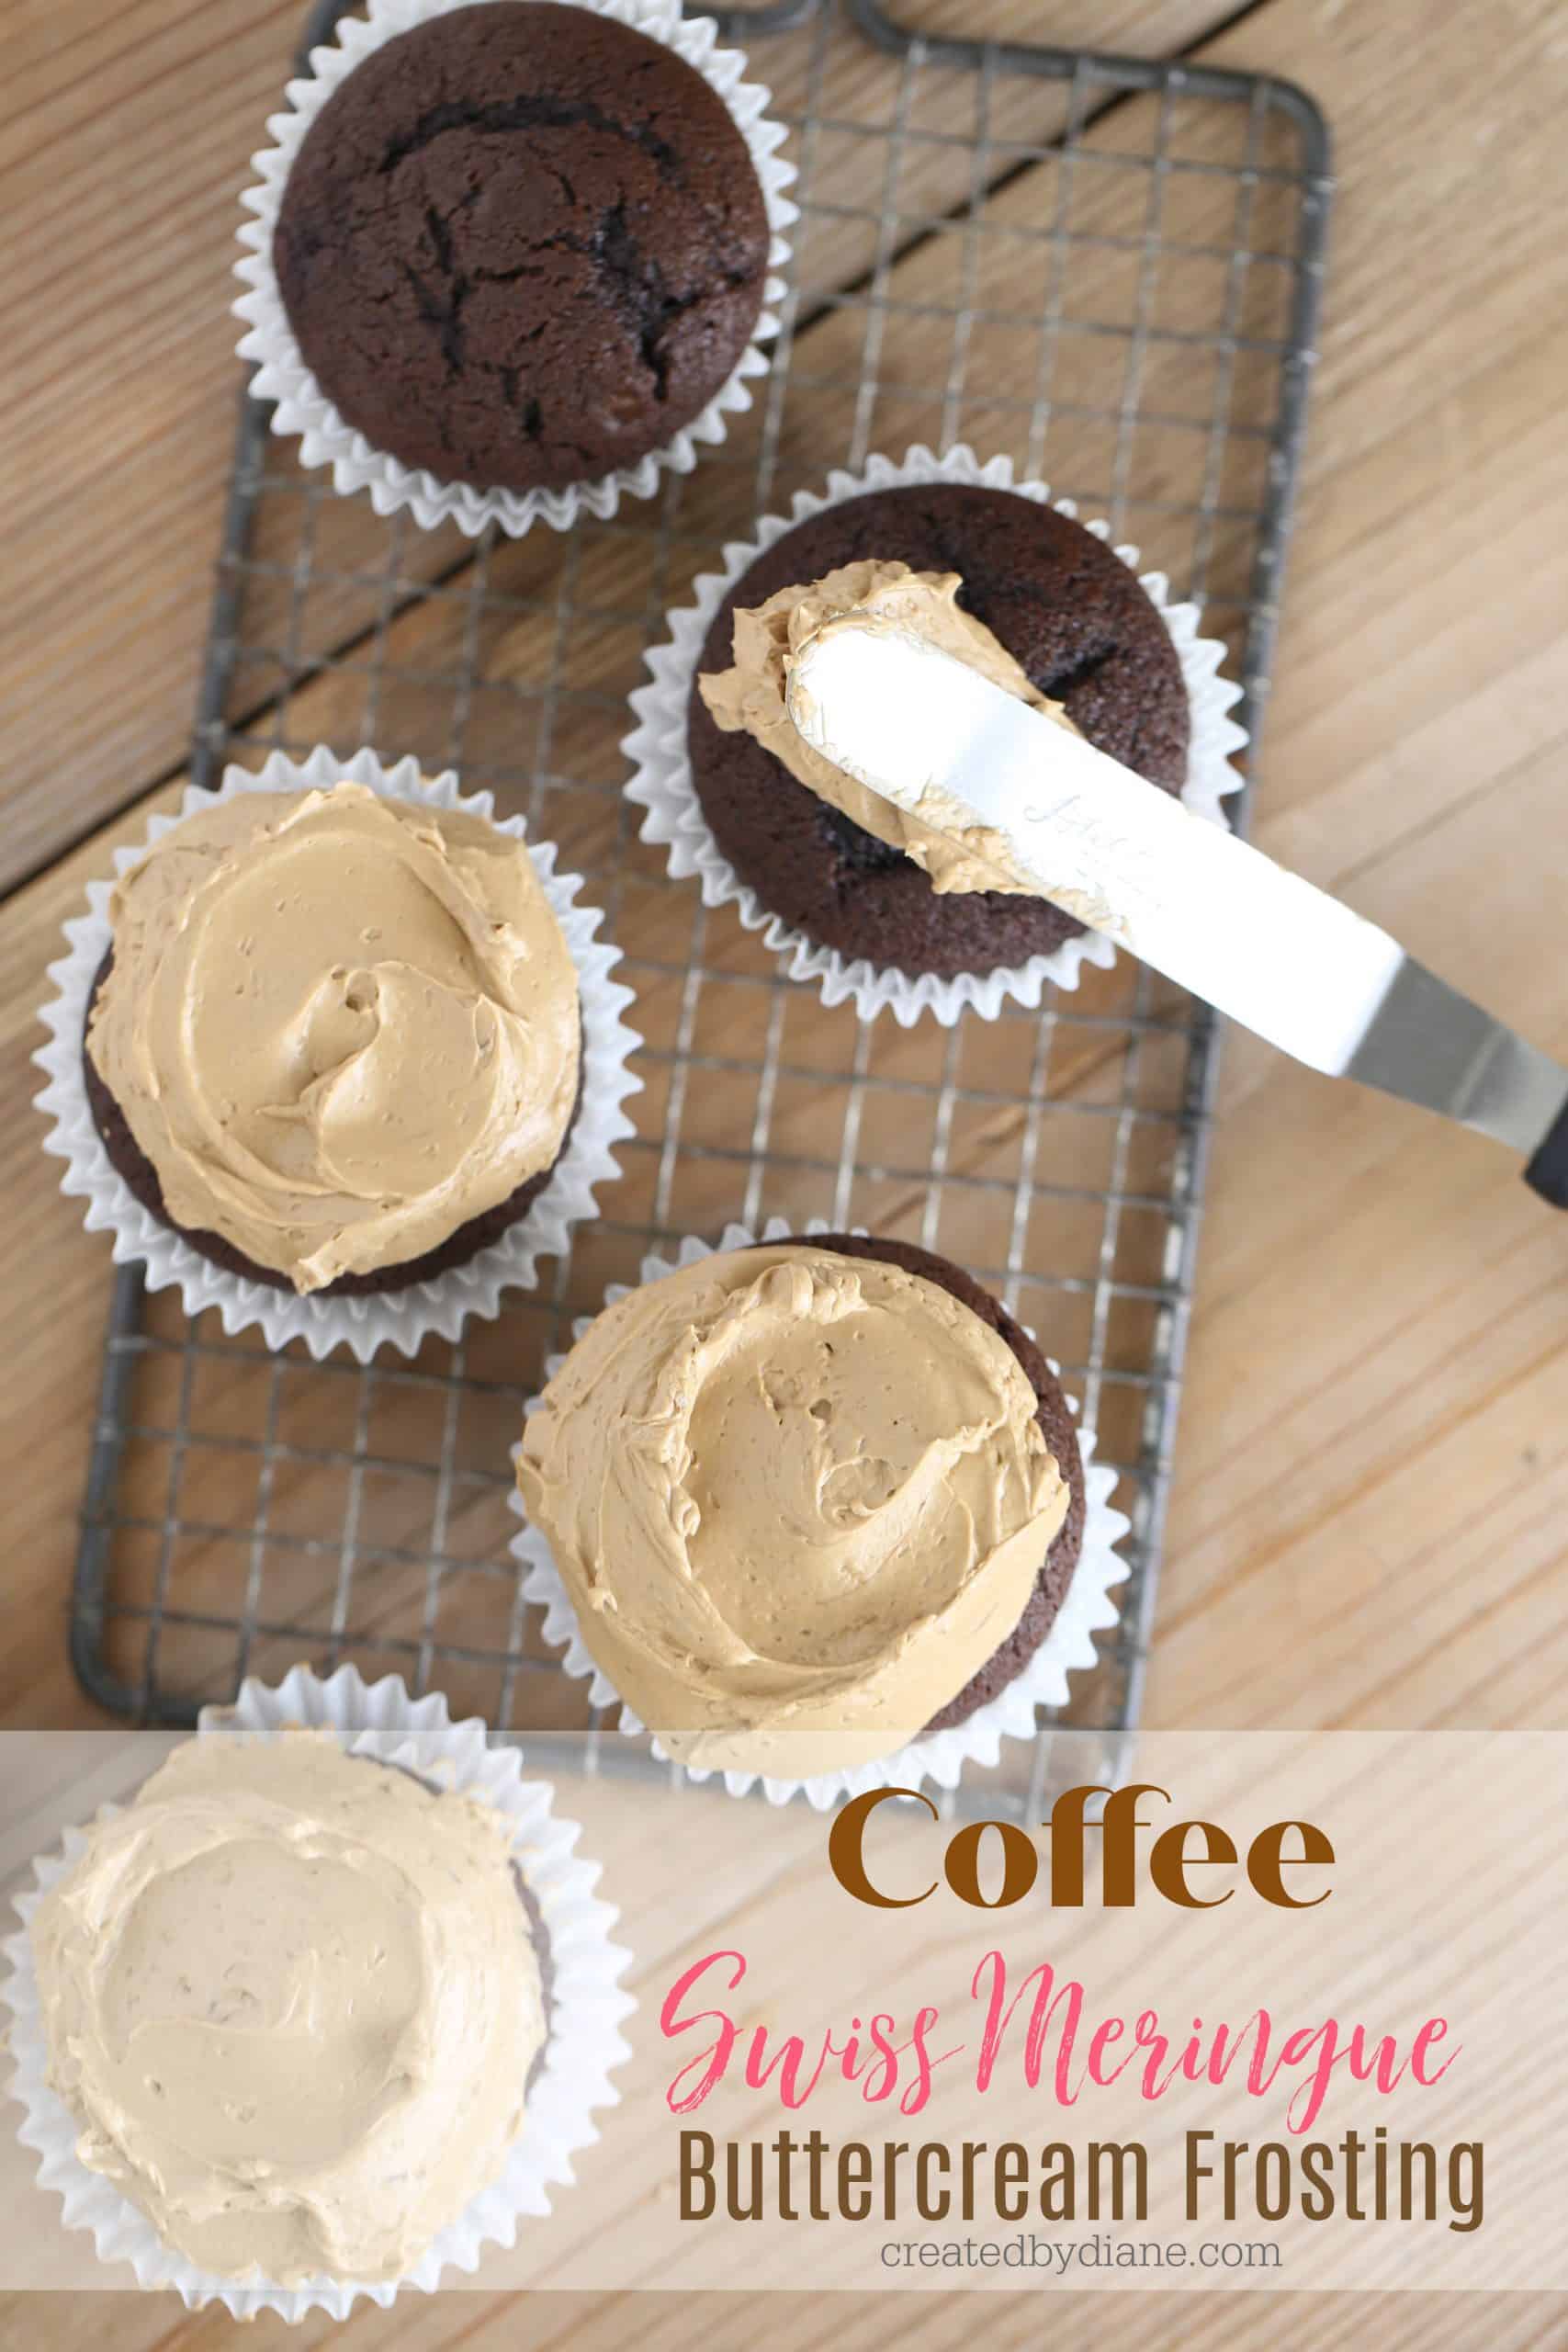 Coffee Swiss Meringue Buttercream Frosting | Created by Diane